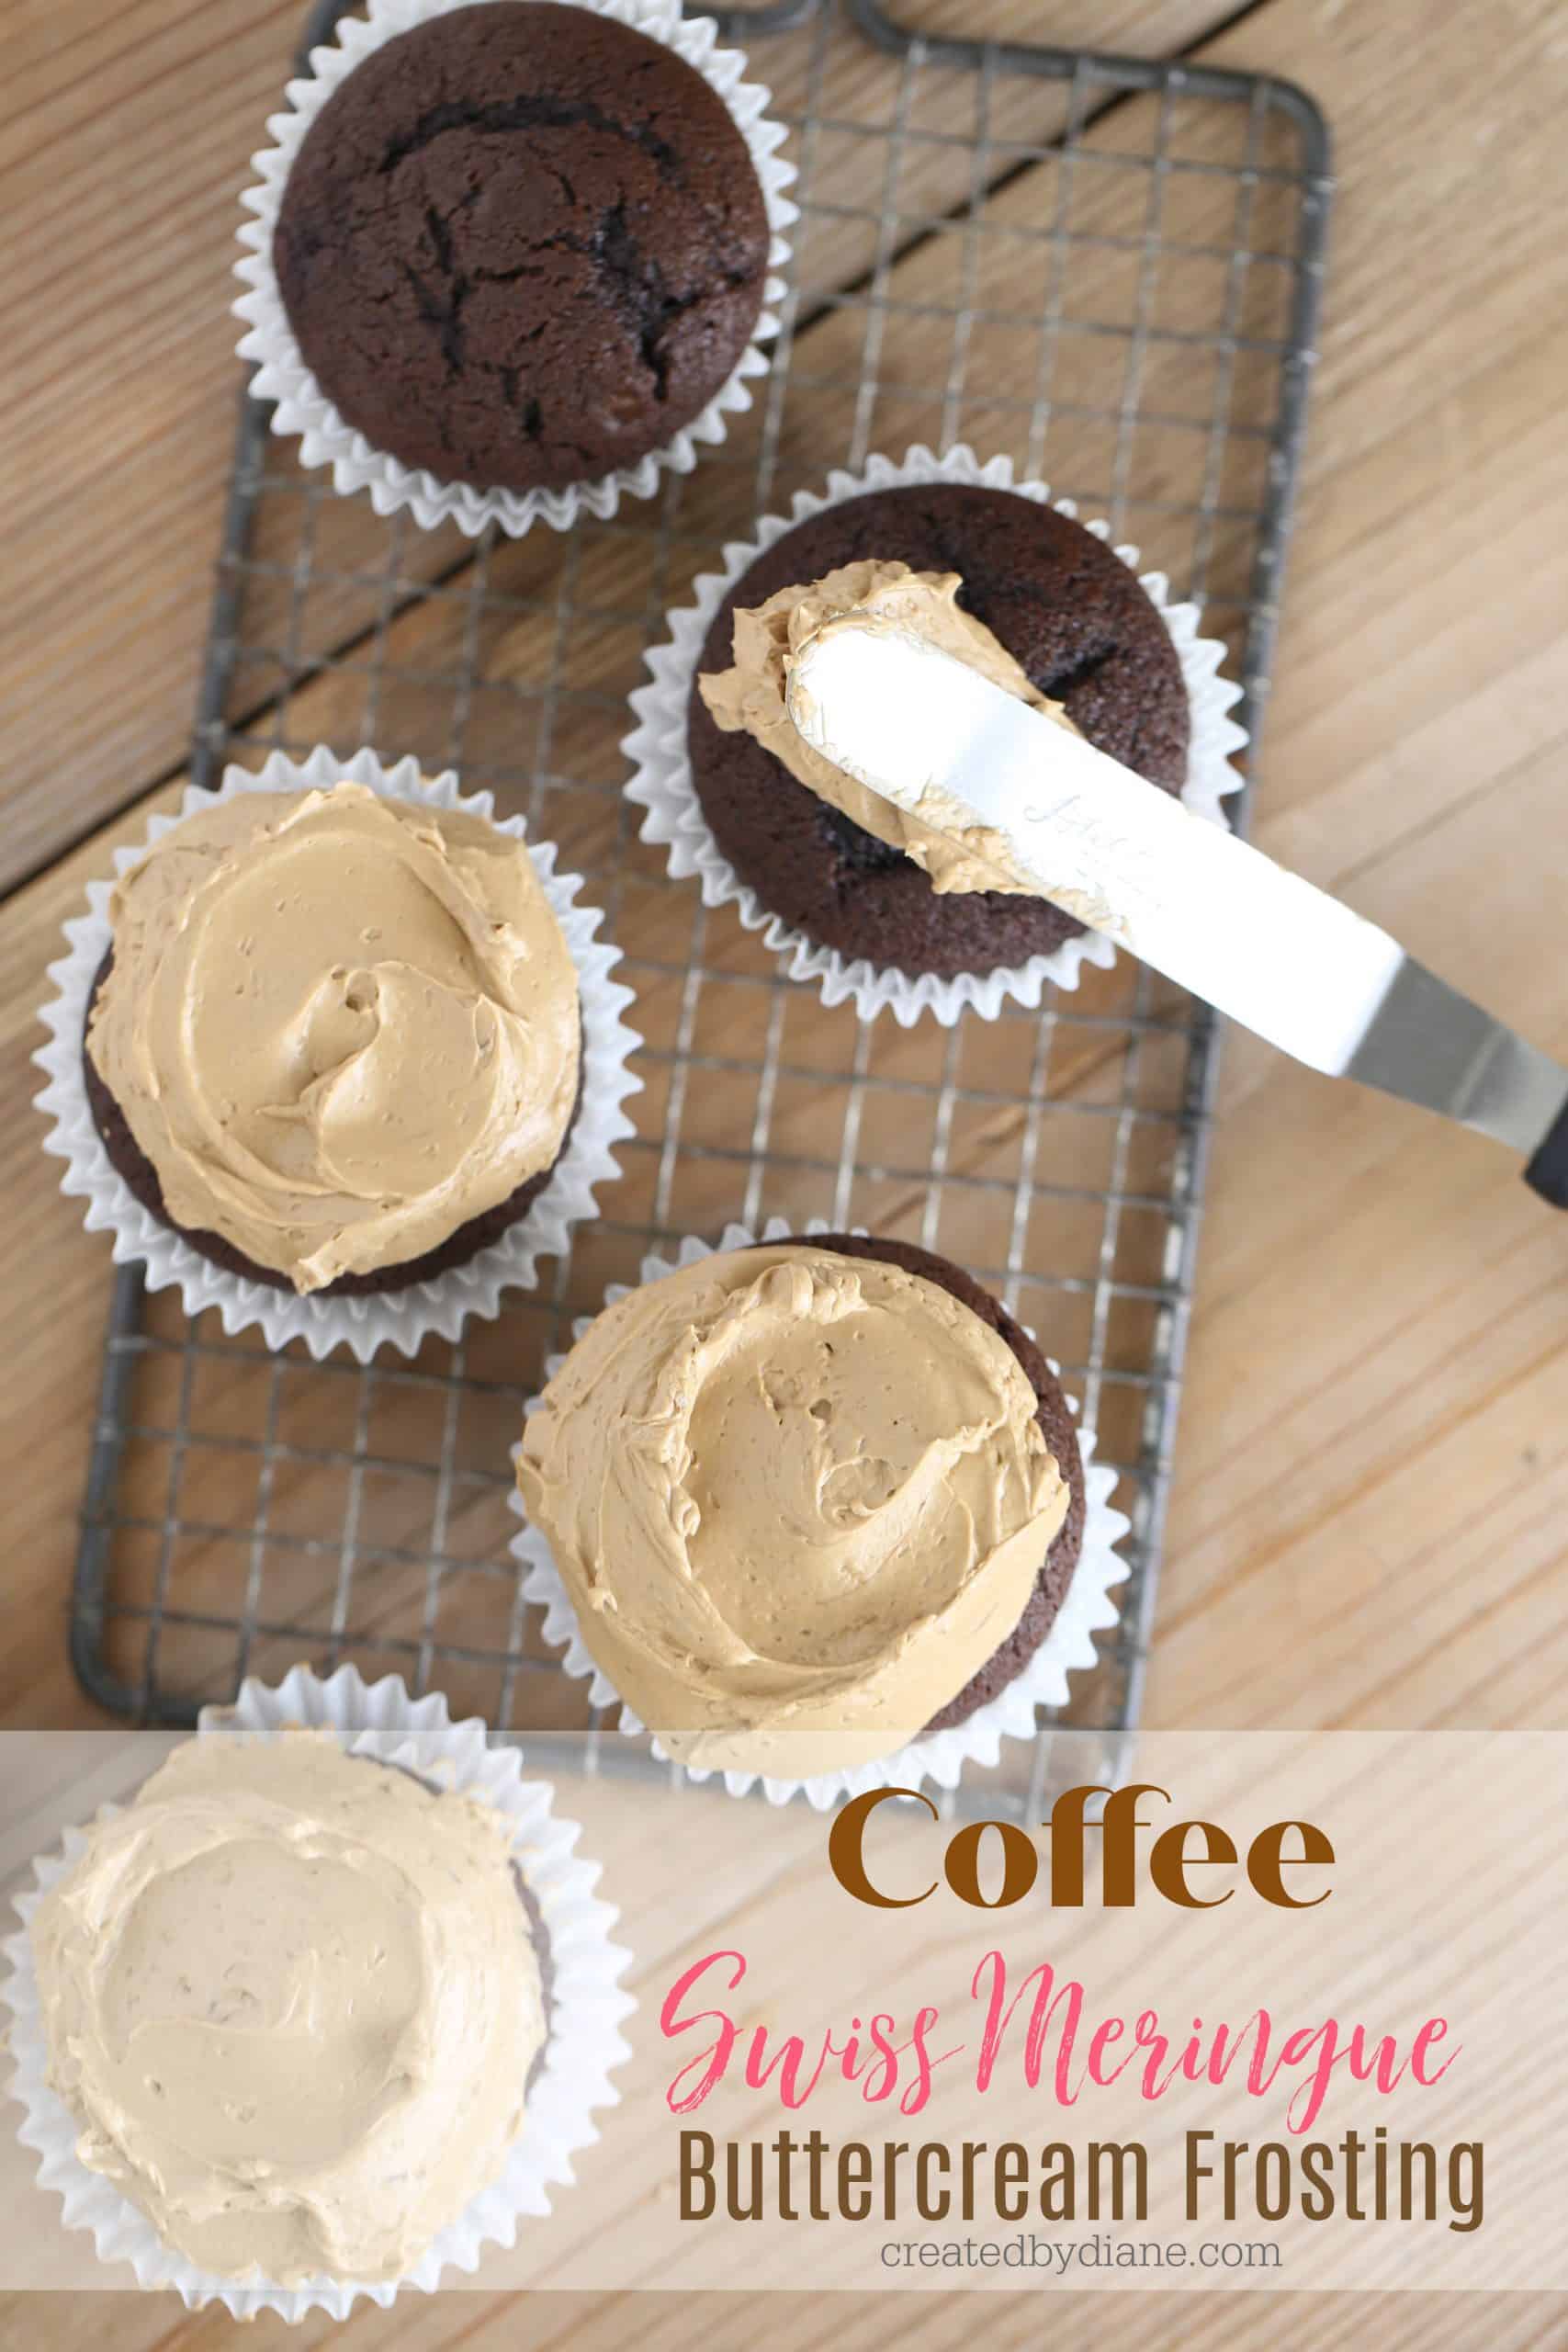 Coffee Swiss Meringue Buttercream Frosting | Created by Diane